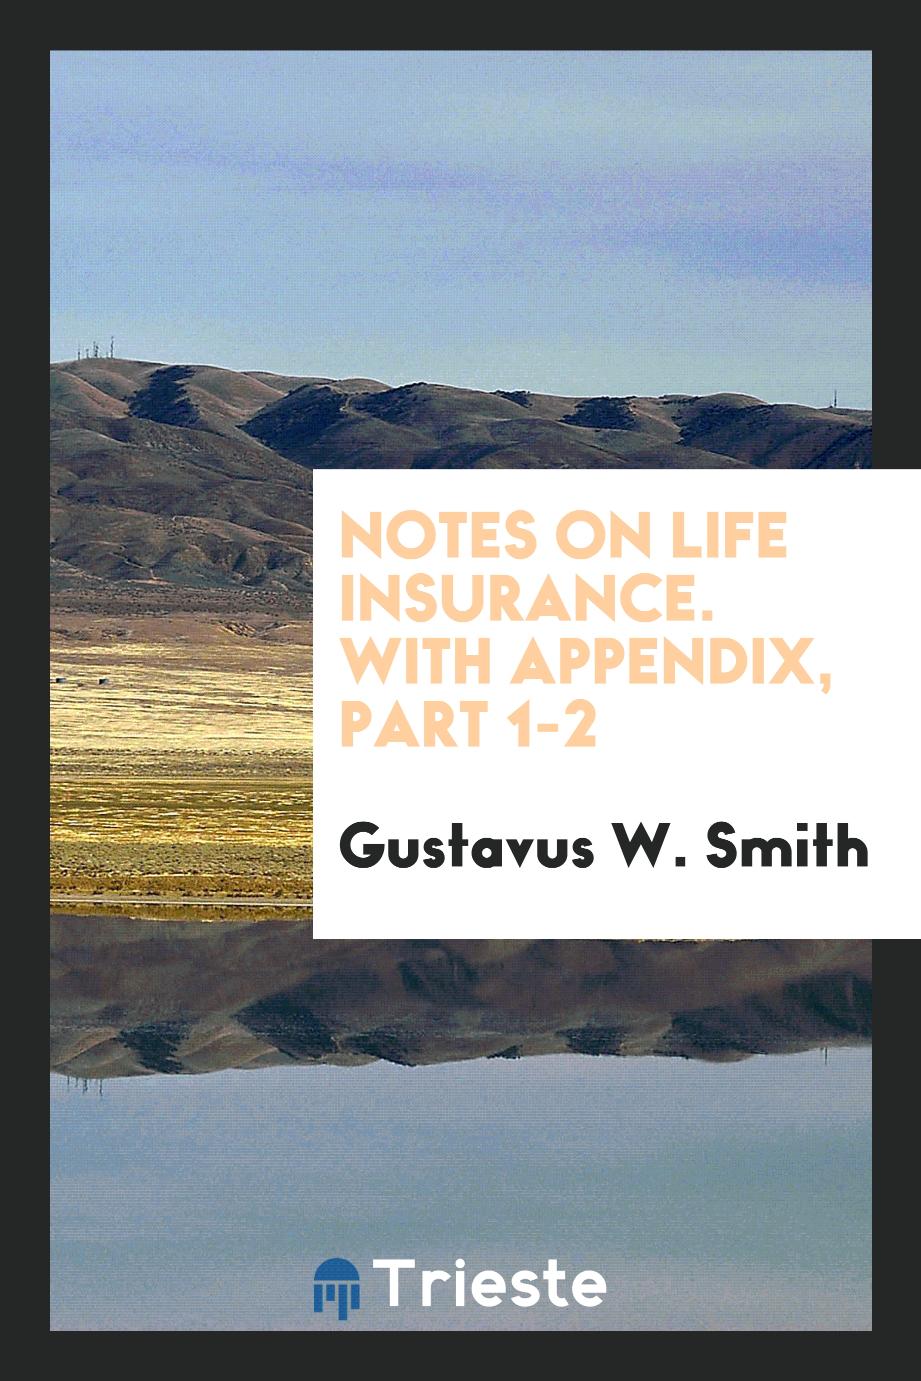 Notes on life insurance. With appendix, Part 1-2